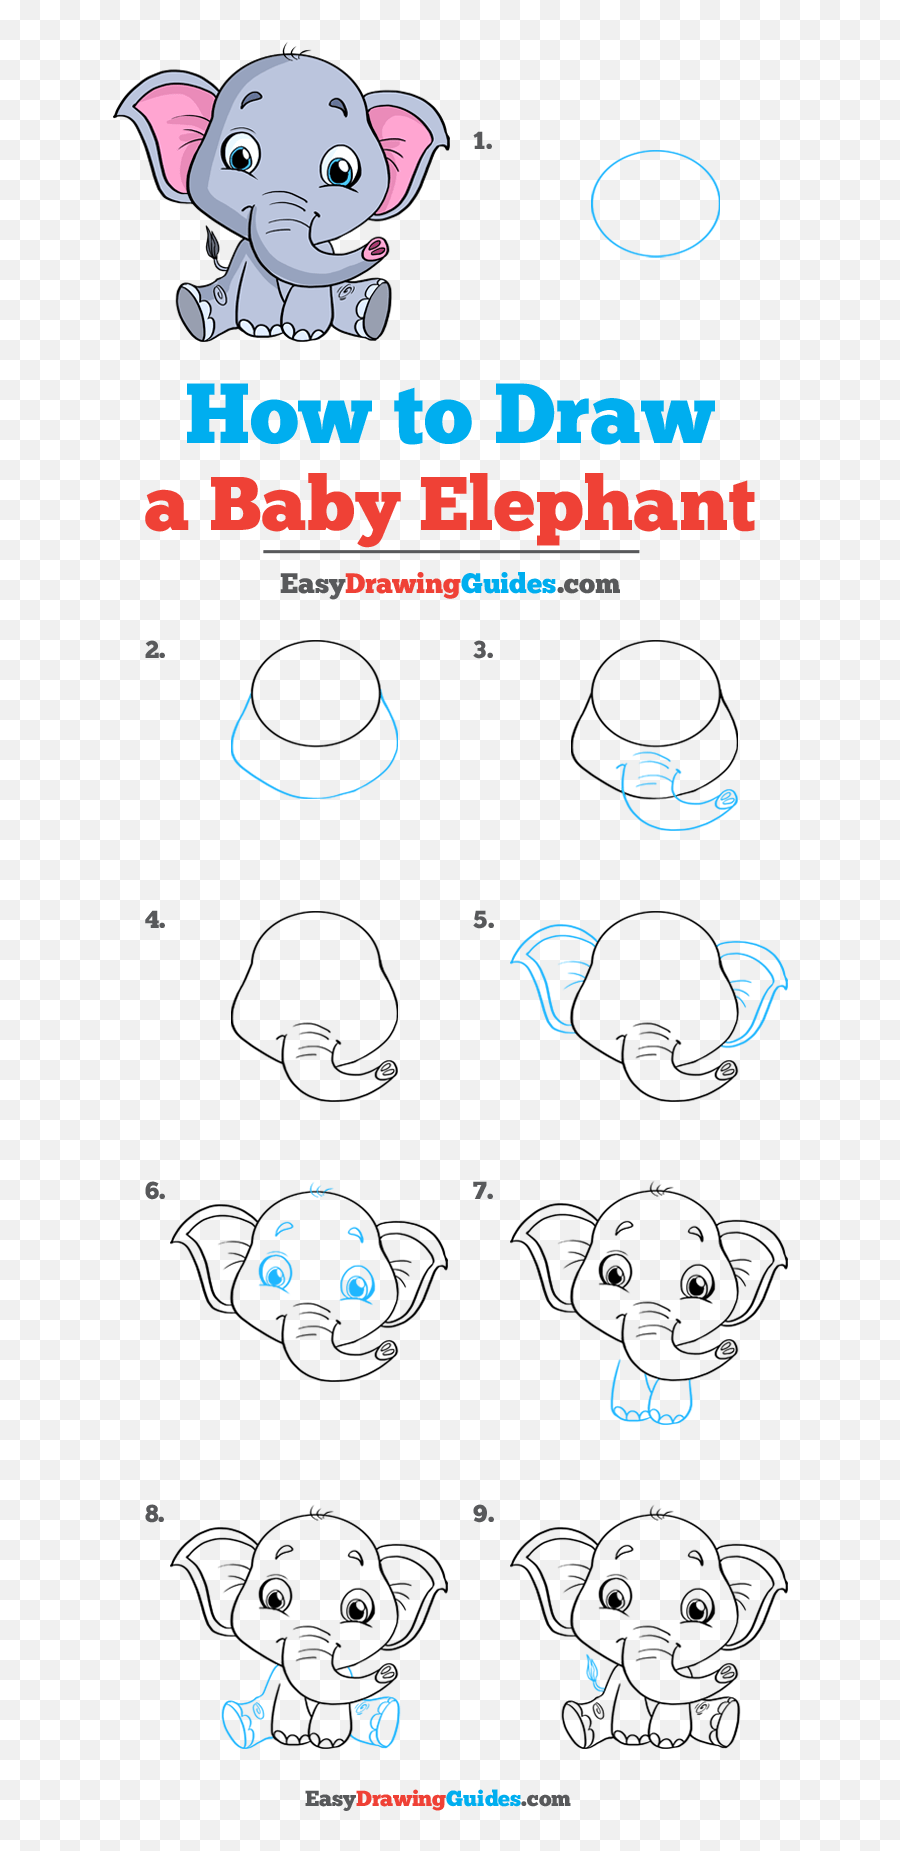 790 Drawing Ideas In 2021 - Draw A Baby Elephant Easy Step By Step Emoji,How To Draw Wolf Emotions